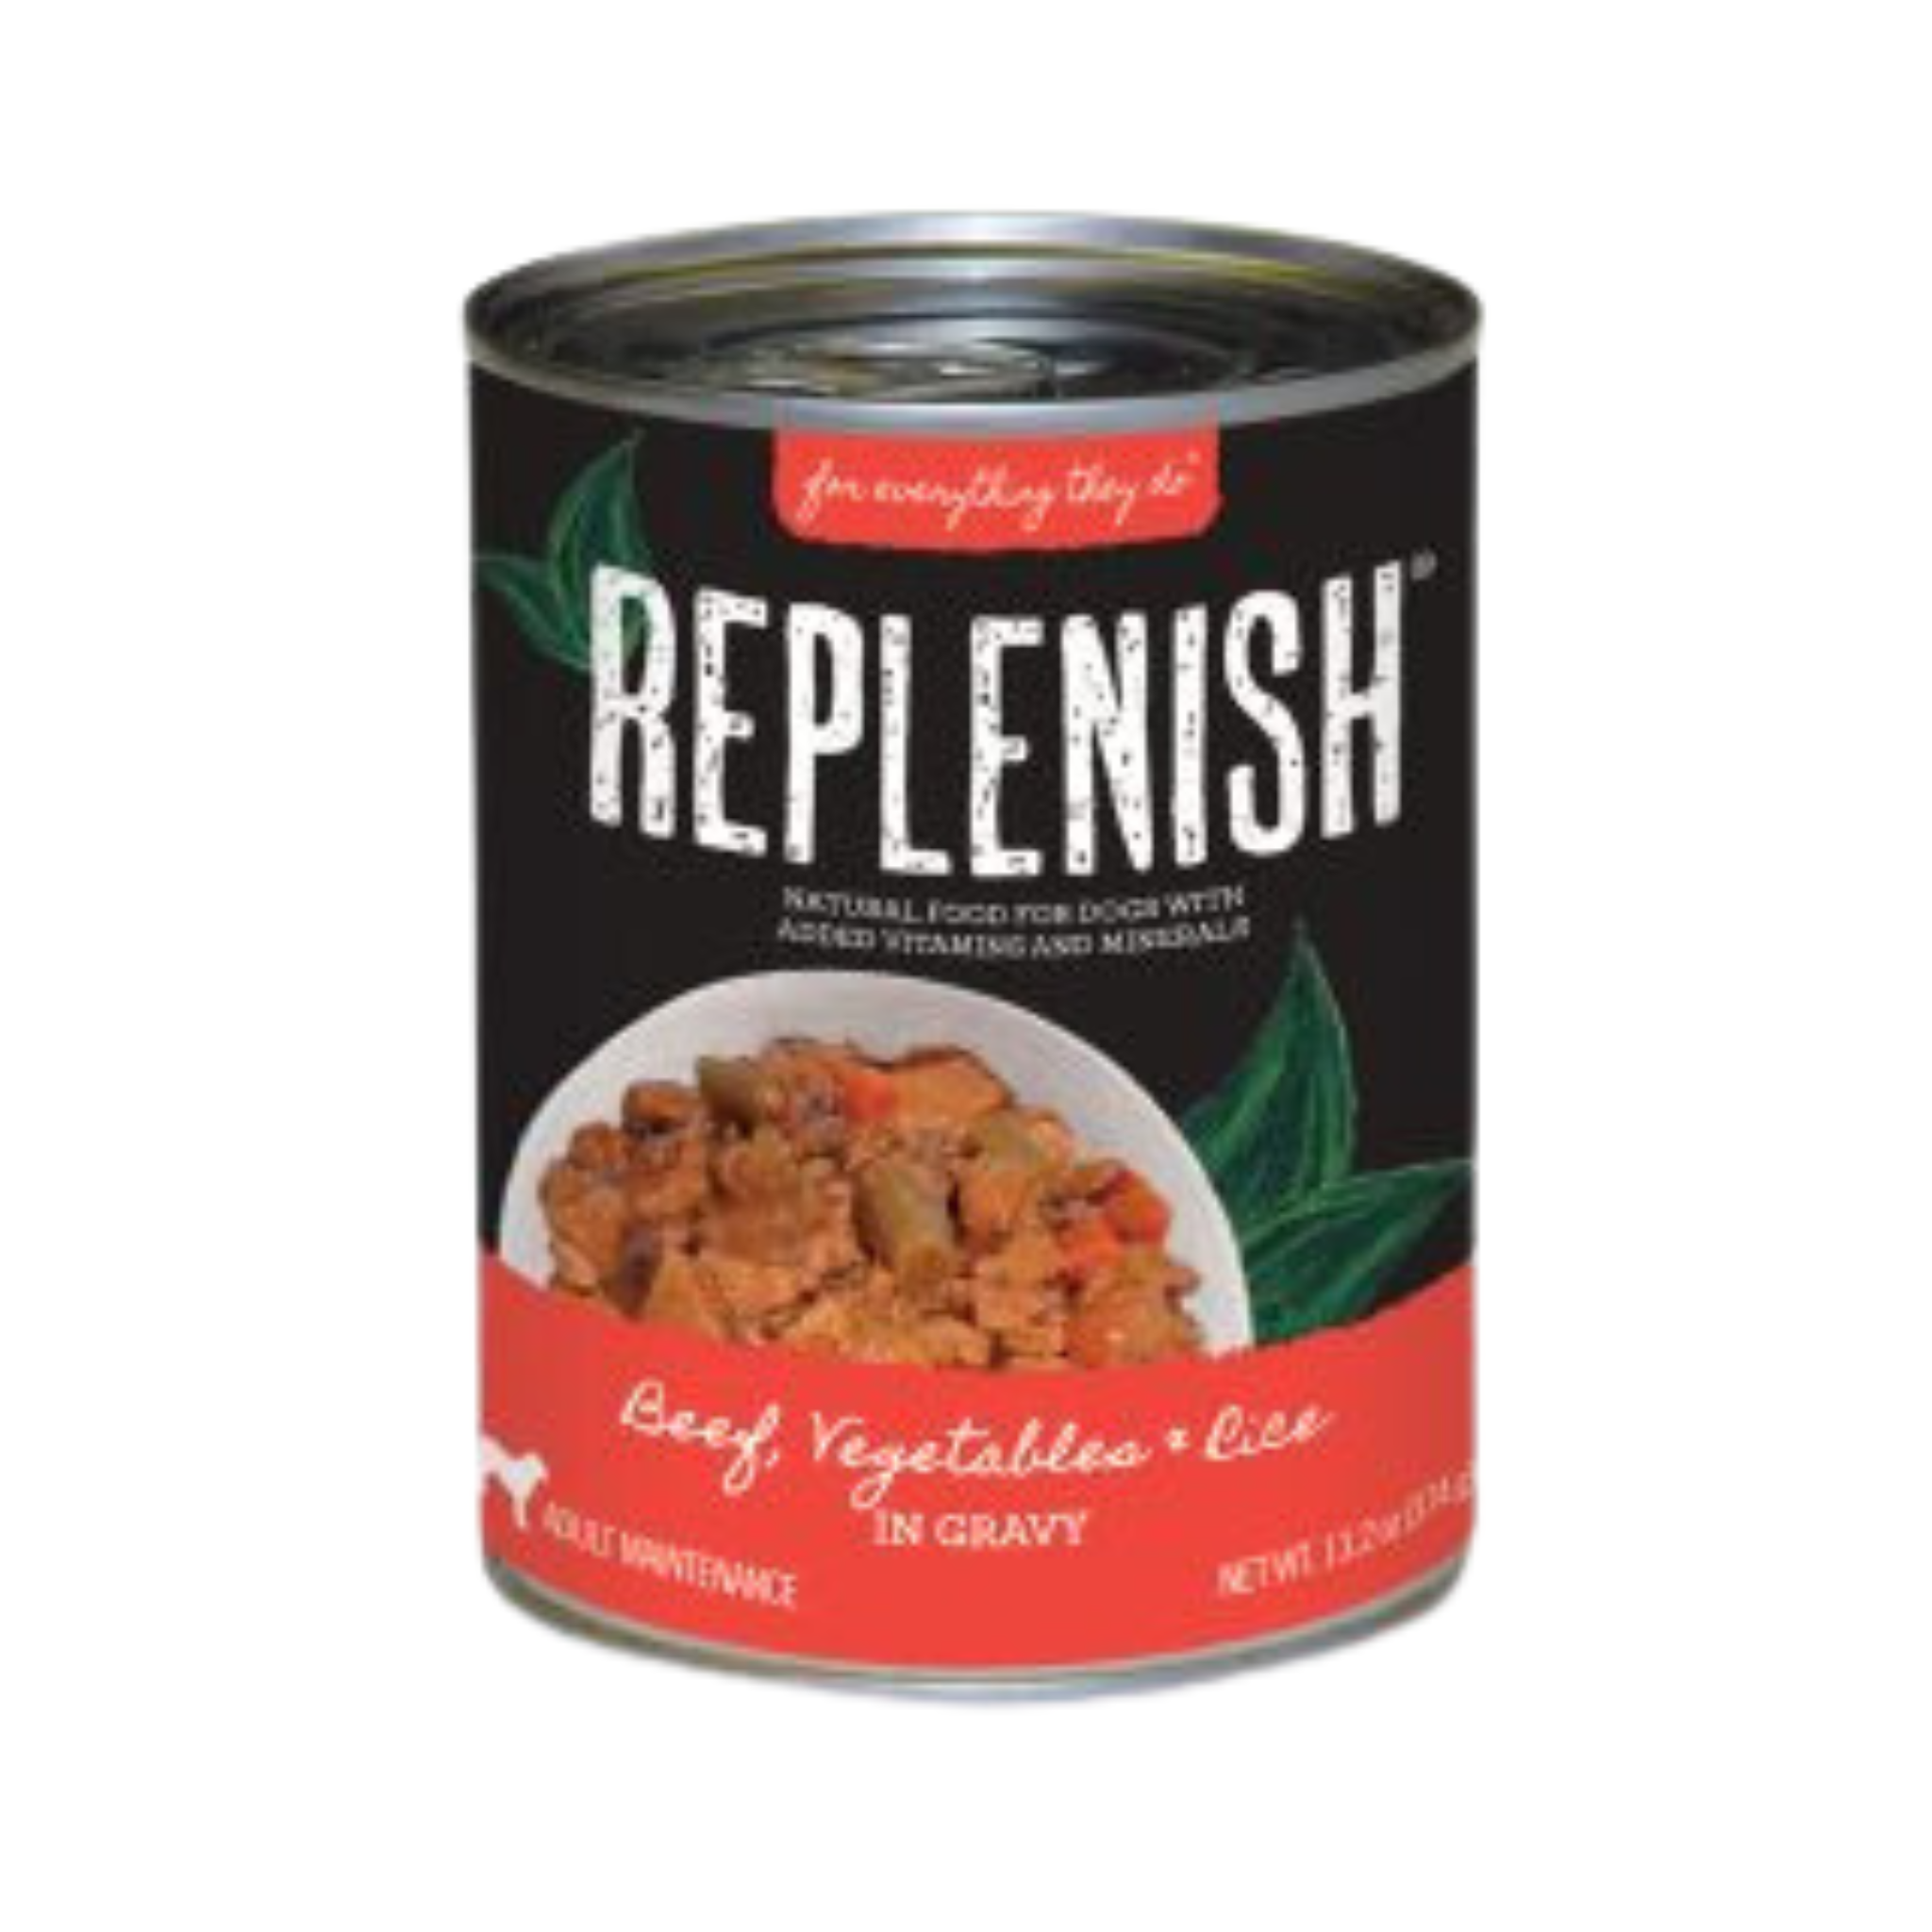 Replenish Beef, Vegetables & Rice In Gravy Dog Canned